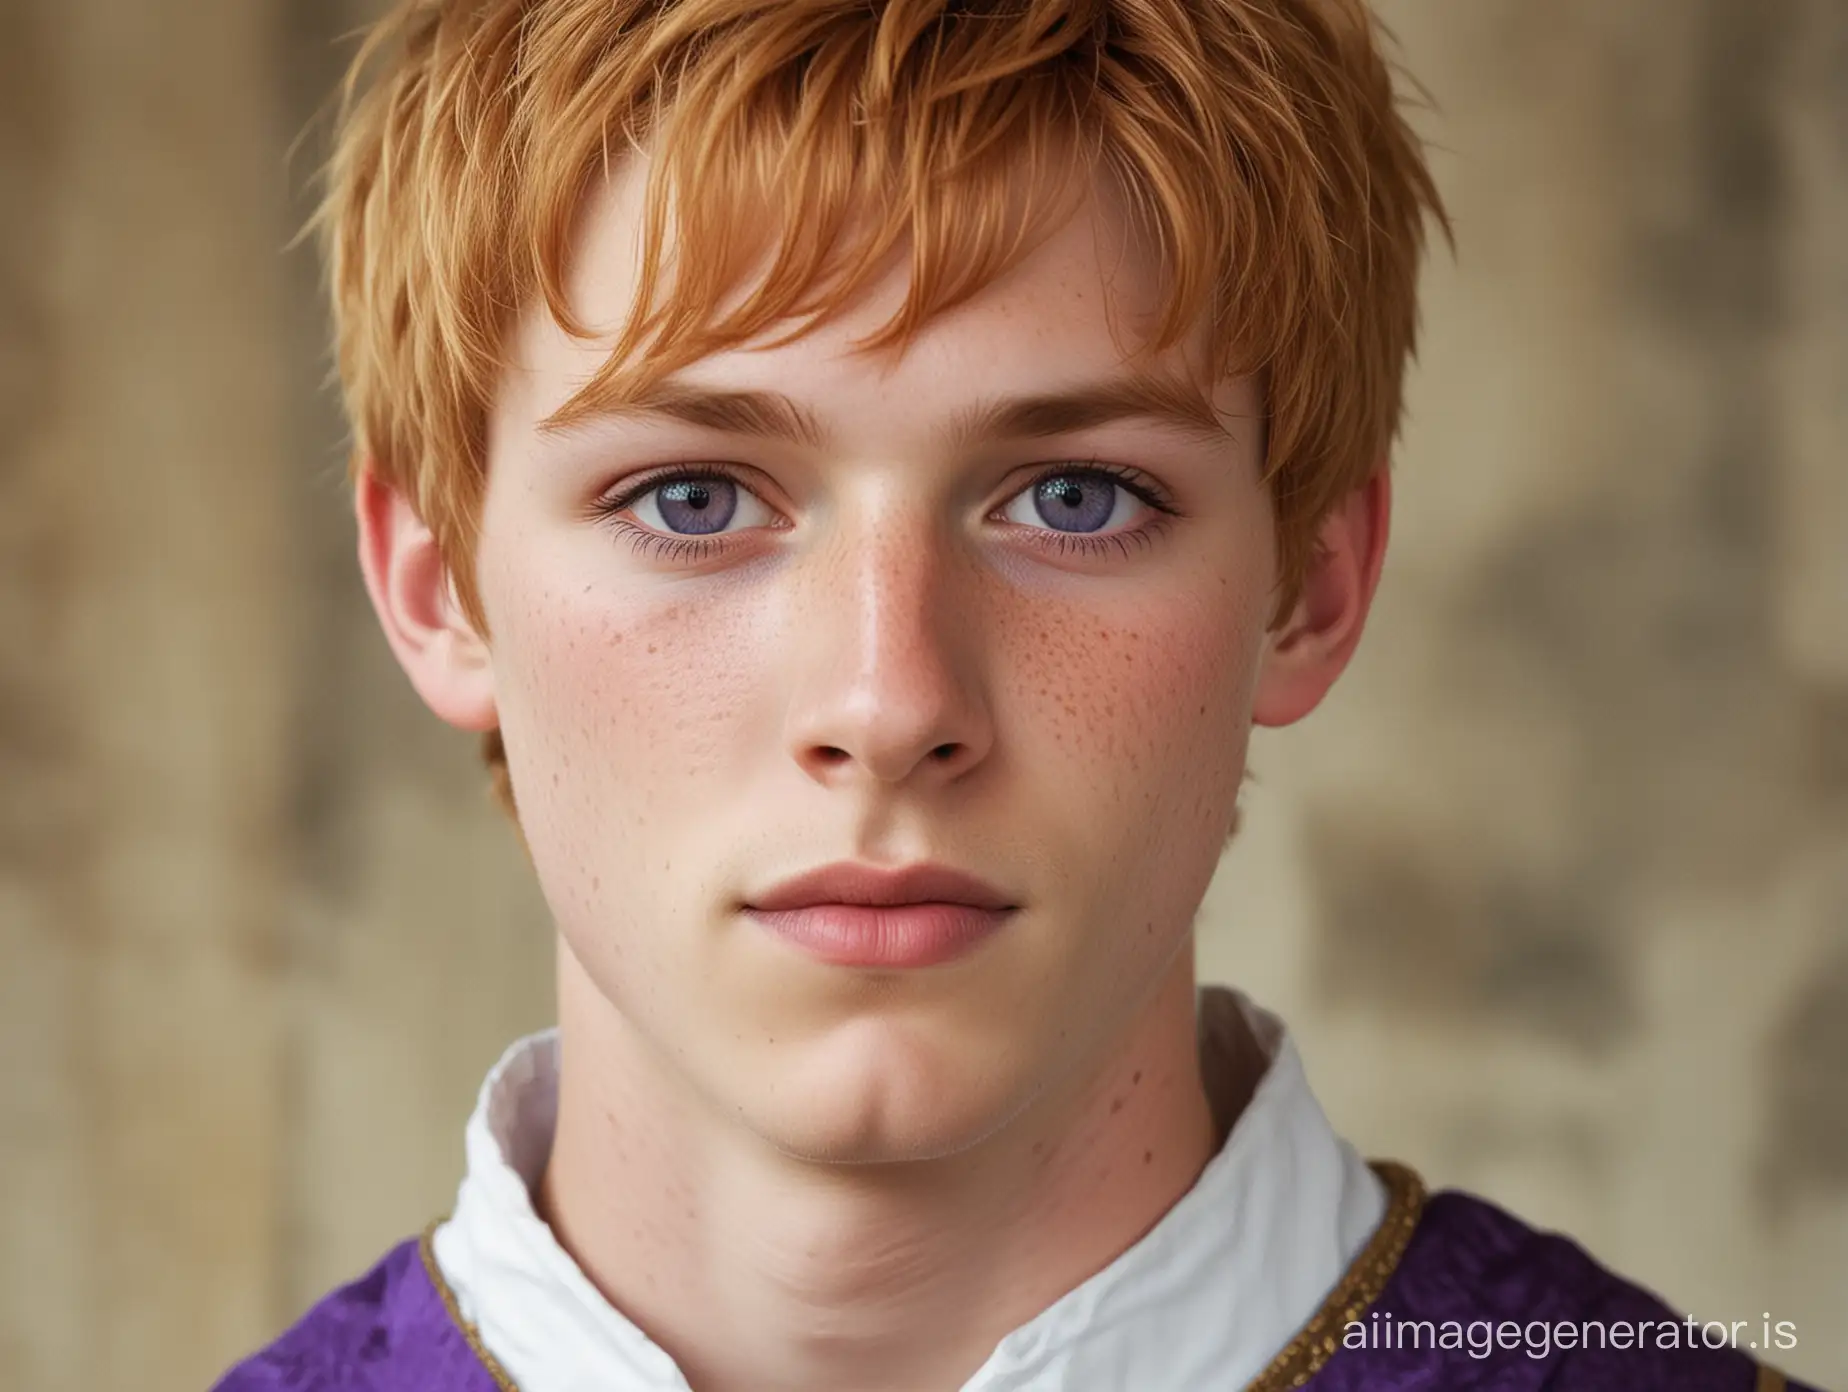 Medieval-Teen-with-Strawberry-Blond-Hair-and-Freckles